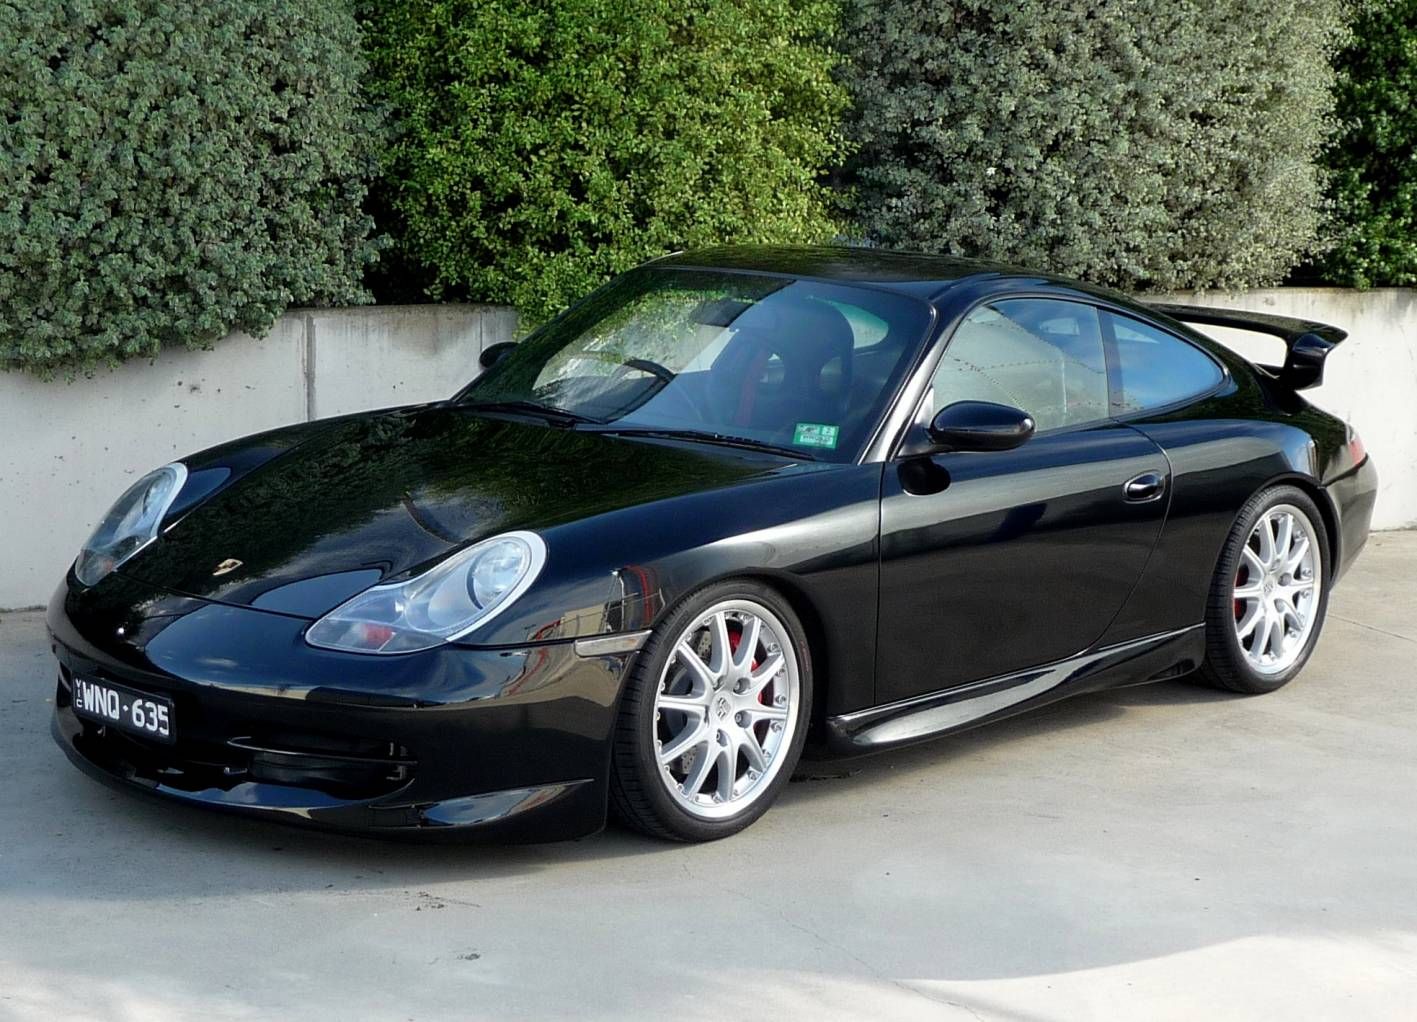 2000 Porsche 911 Carrera 0-60 Times, Top Speed, Specs, Quarter Mile, and  Wallpapers - MyCarSpecs United States / USA